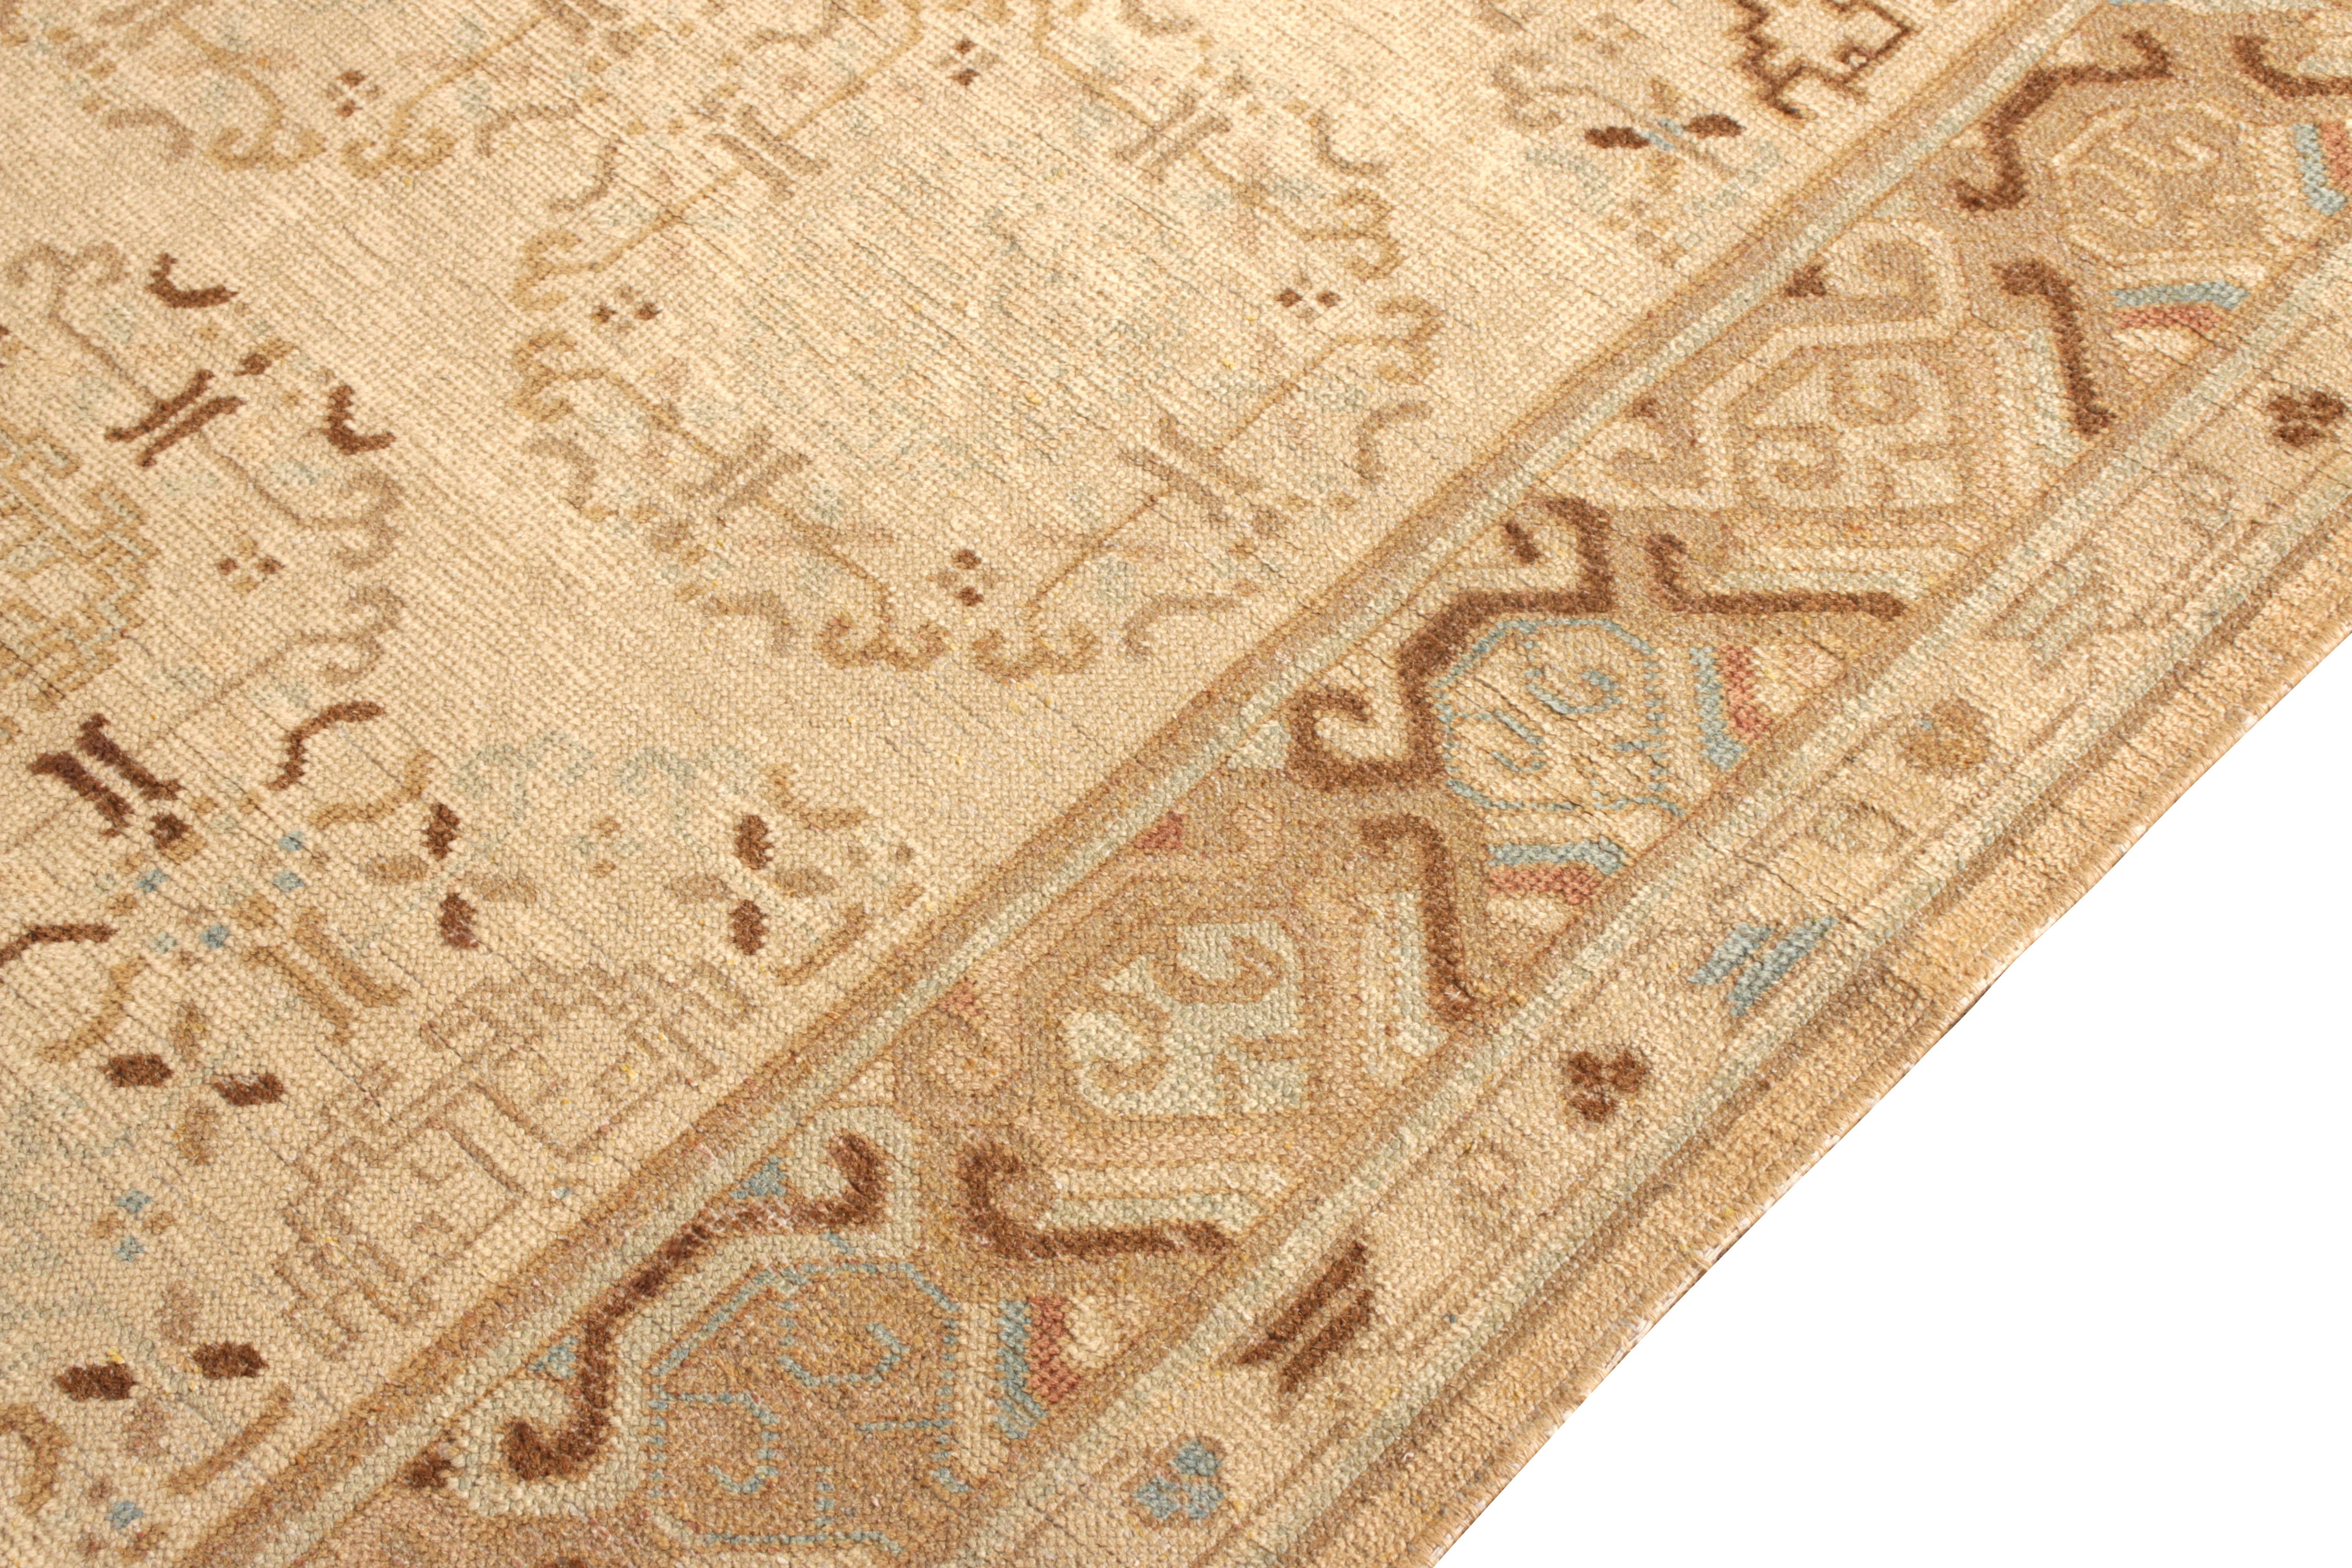 Hand-Knotted Antique Khotan Rug in Beige-Brown Medallion Pattern In Good Condition For Sale In Long Island City, NY